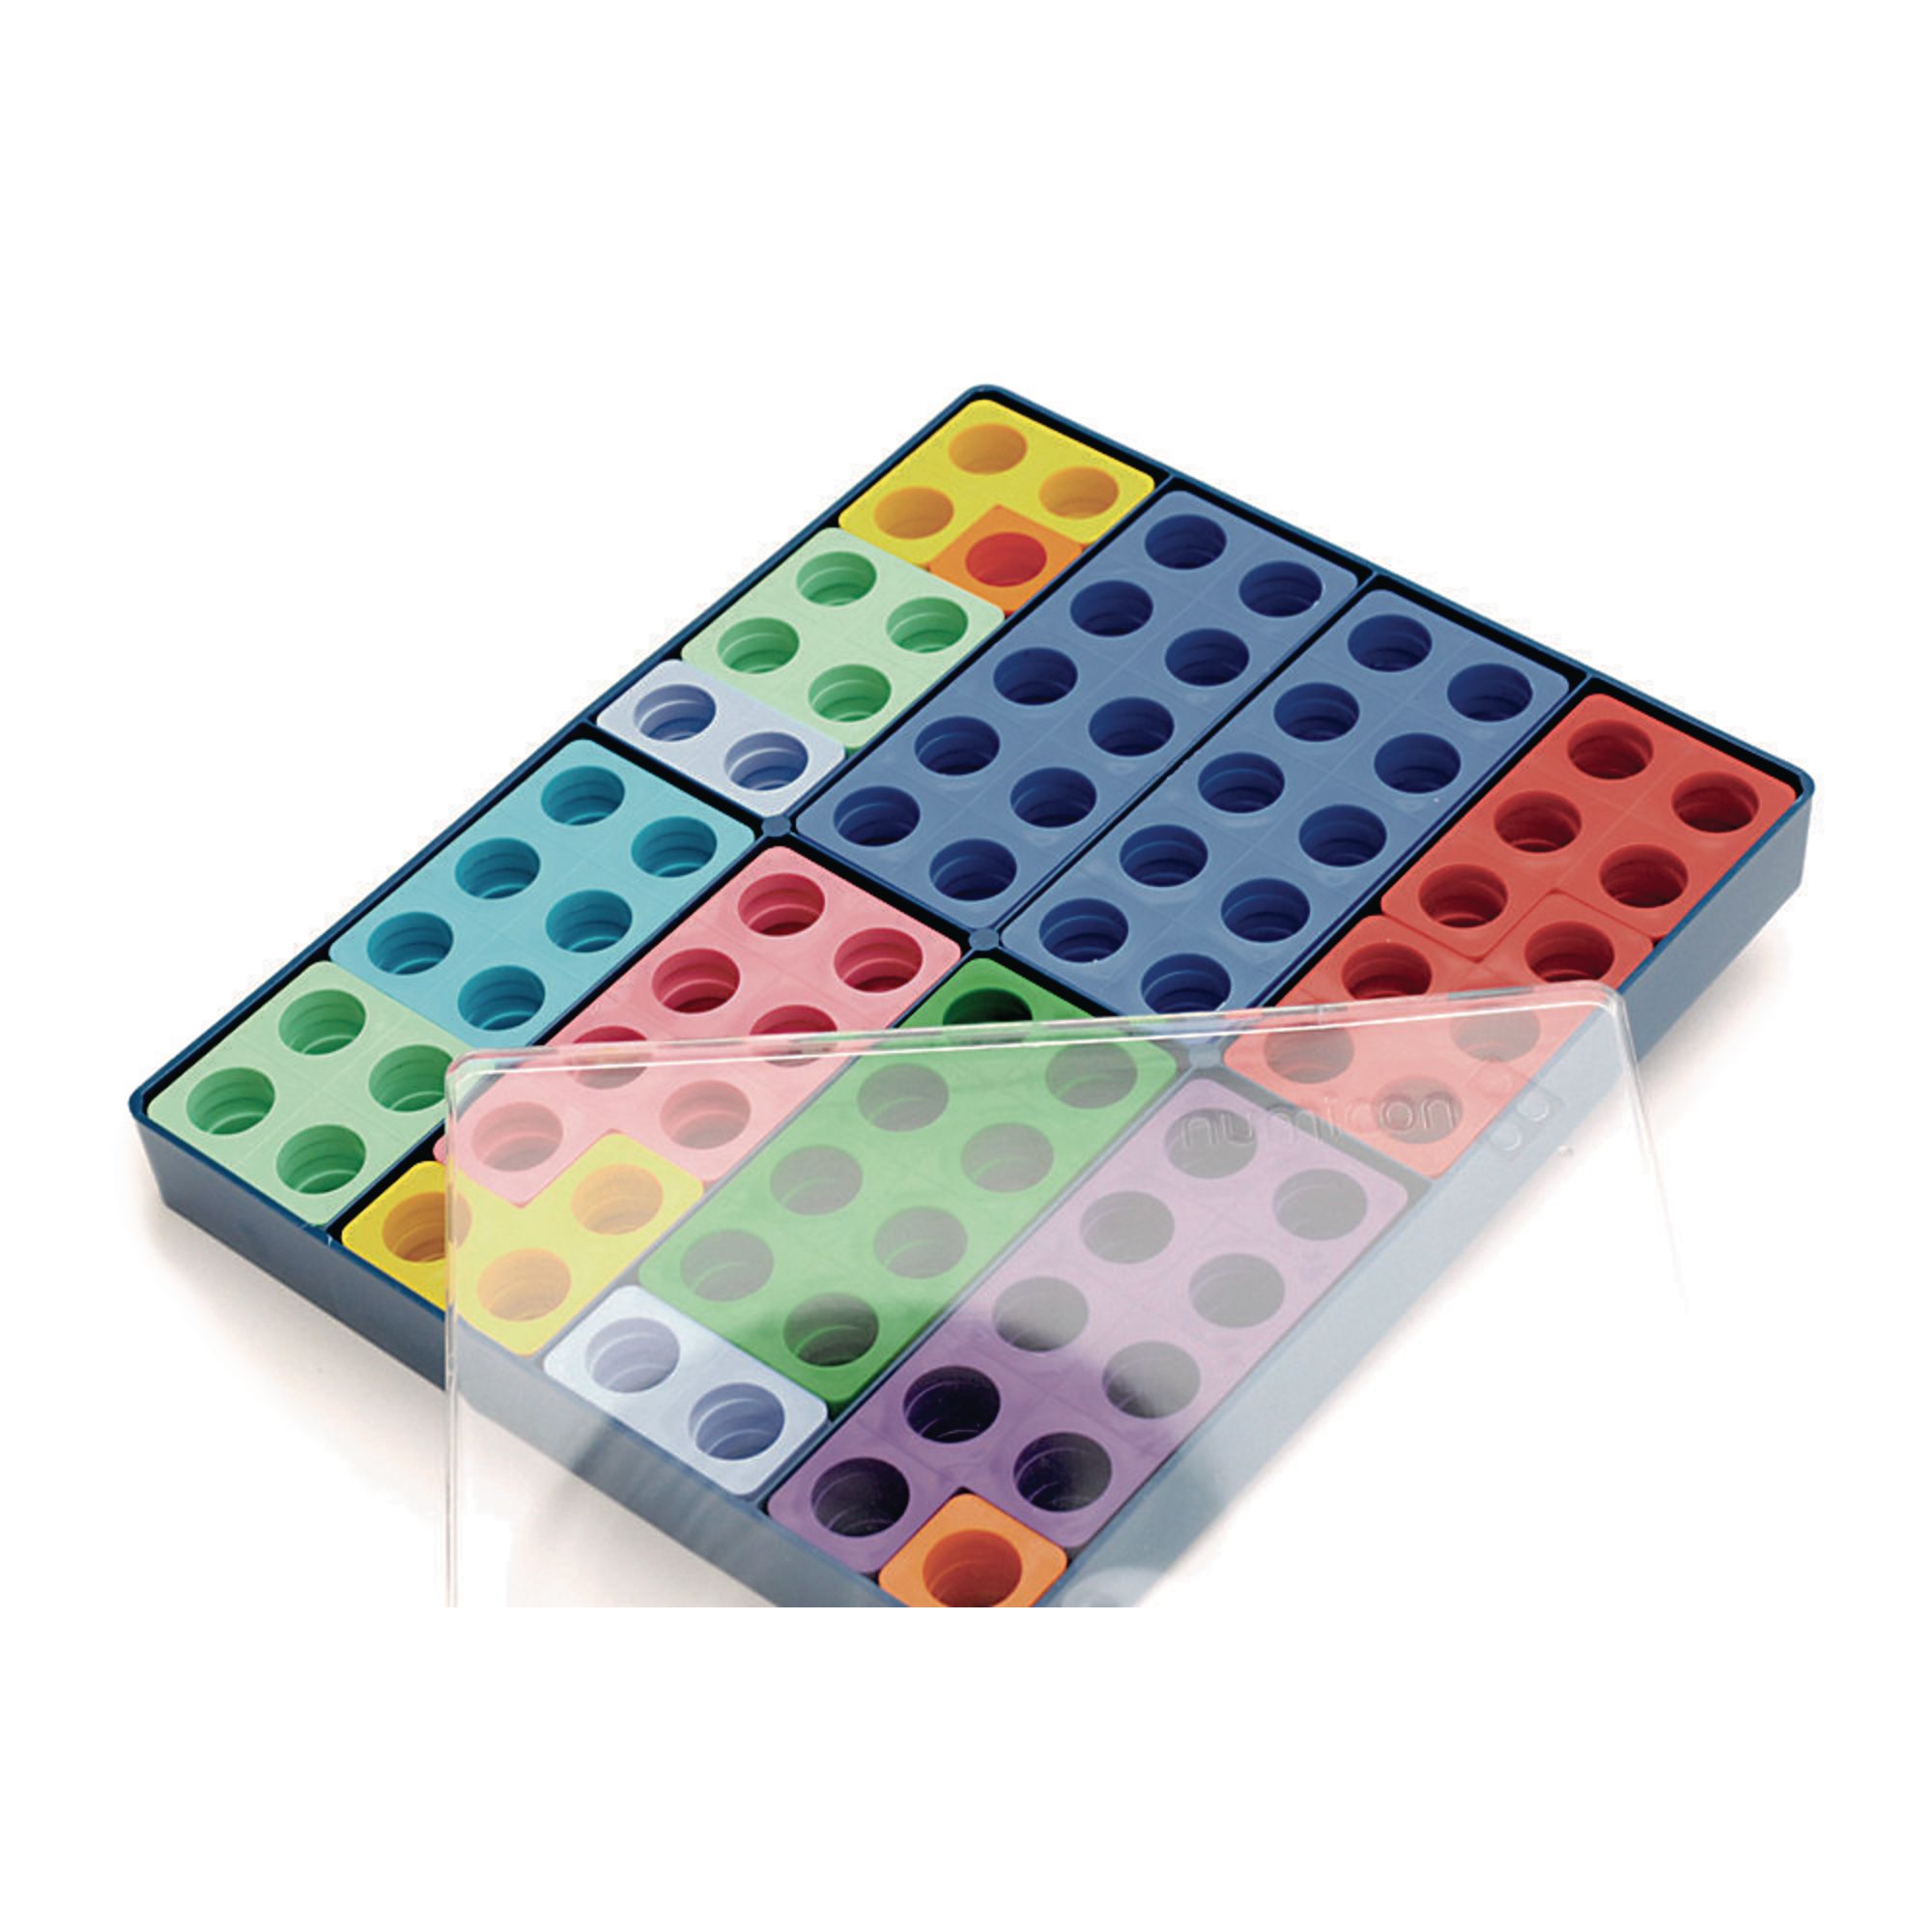 Numicon Boxed Set Of 80 Shapes